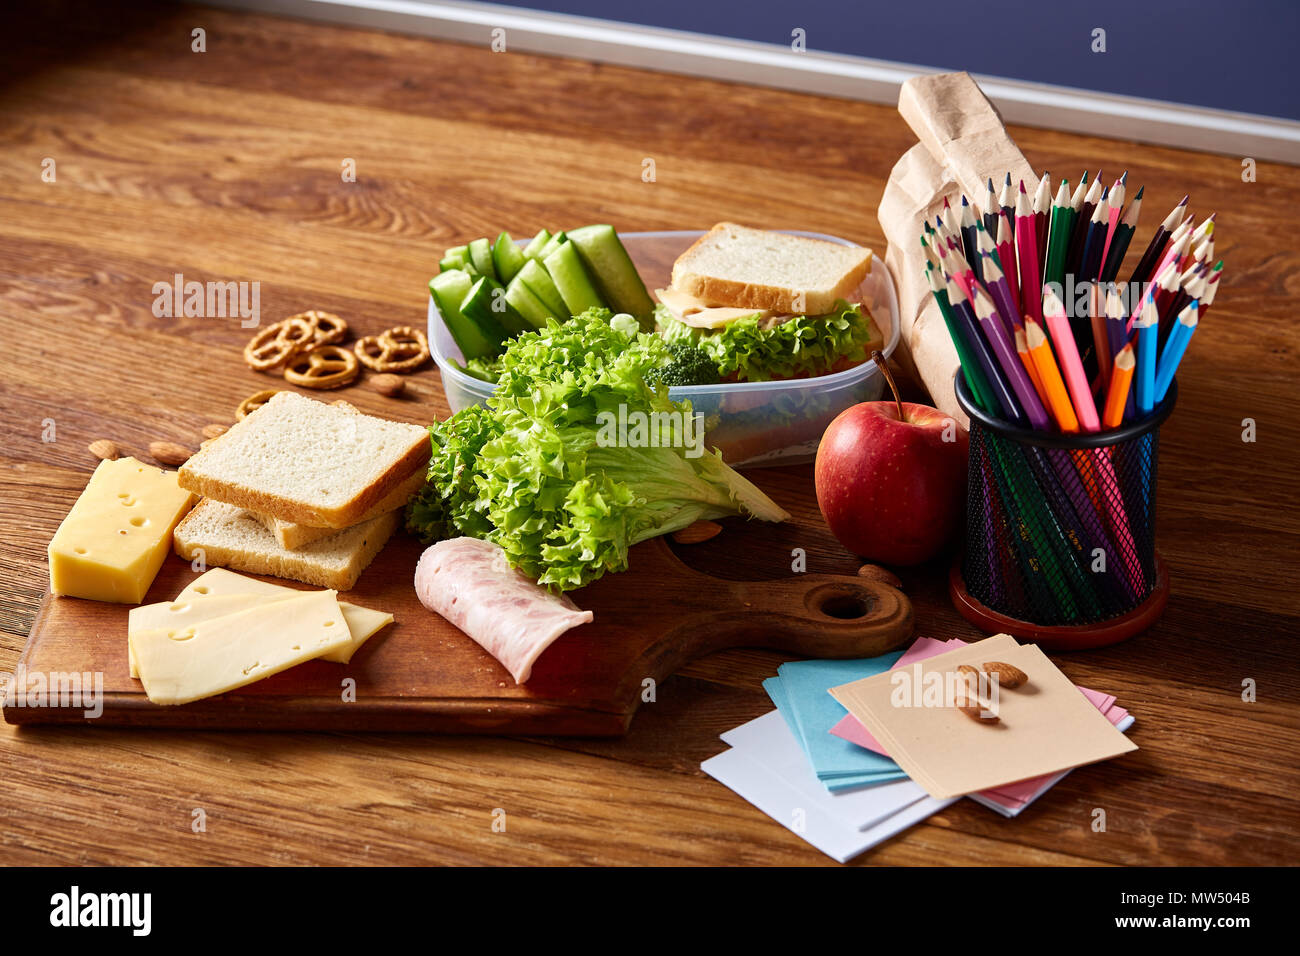 Back to School concept, school supplies, assortment of biscuits and transparent lunchbox full of sandwich, fruits and vegetables togather with assortm Stock Photo